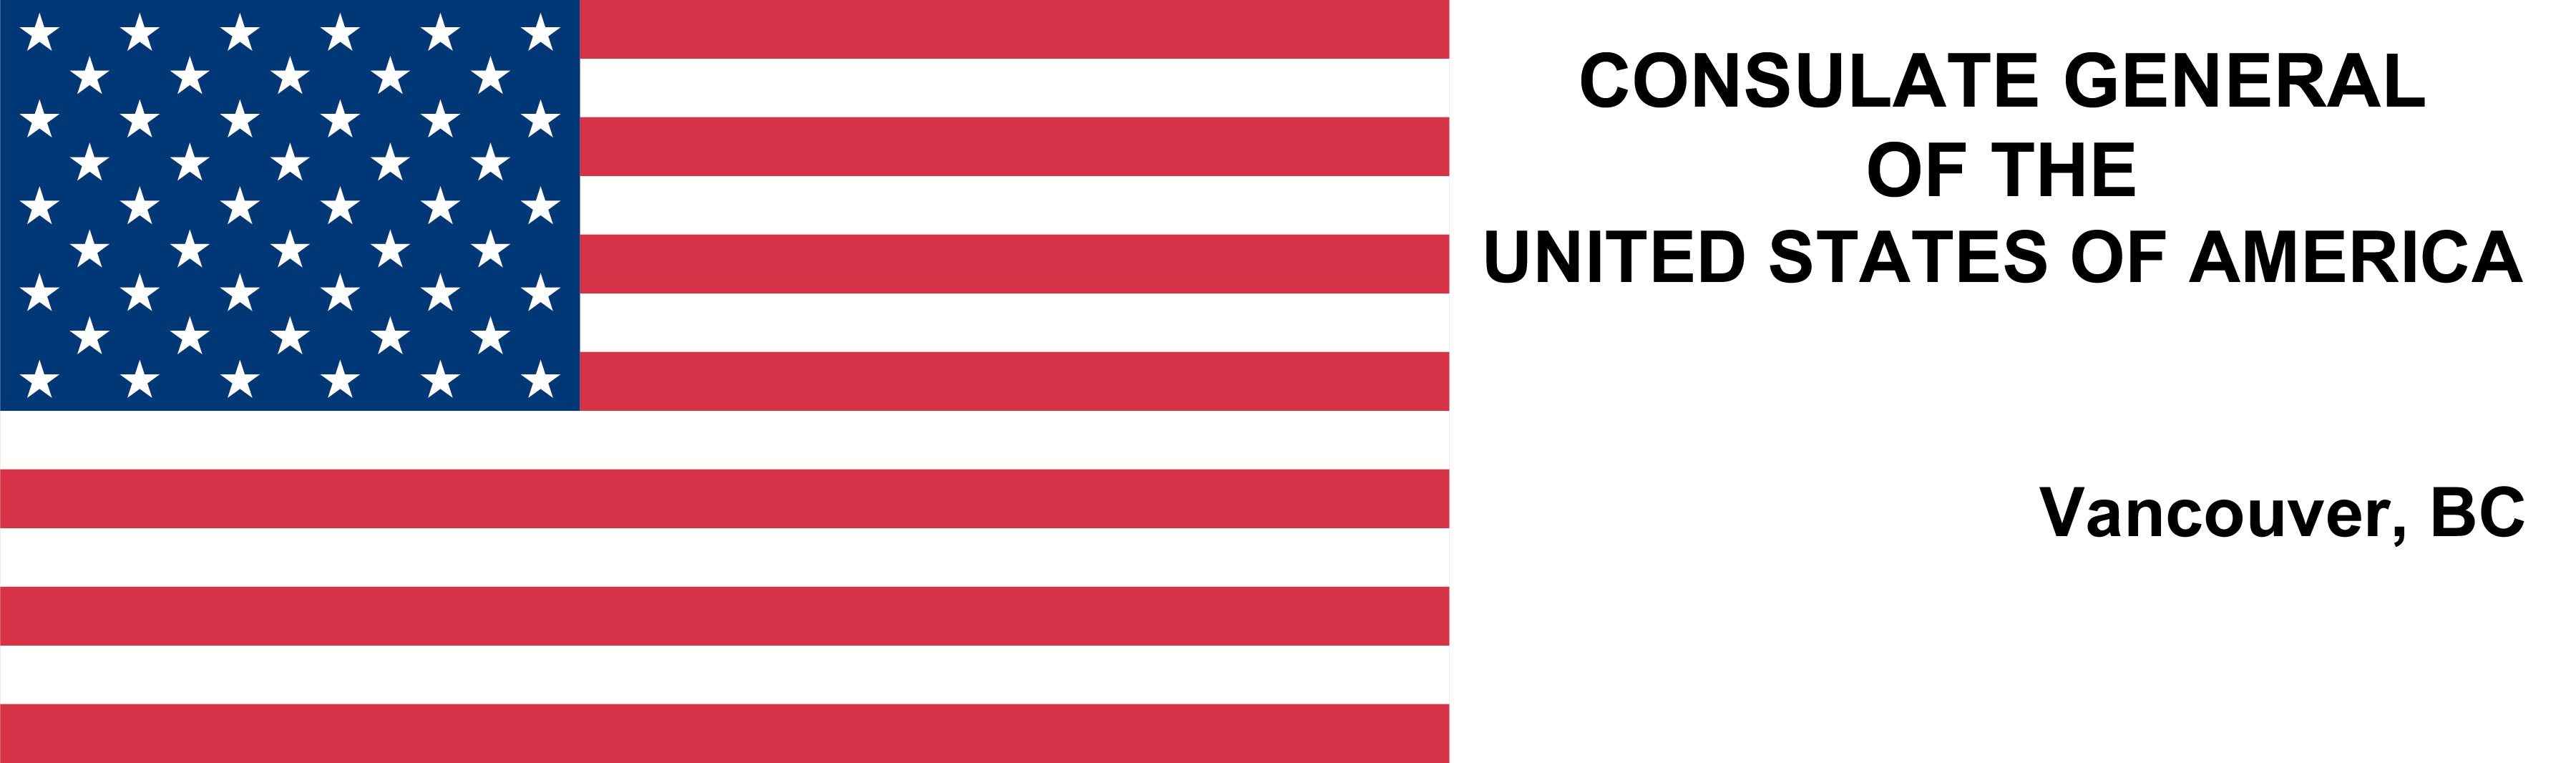 Consulate General of the United States